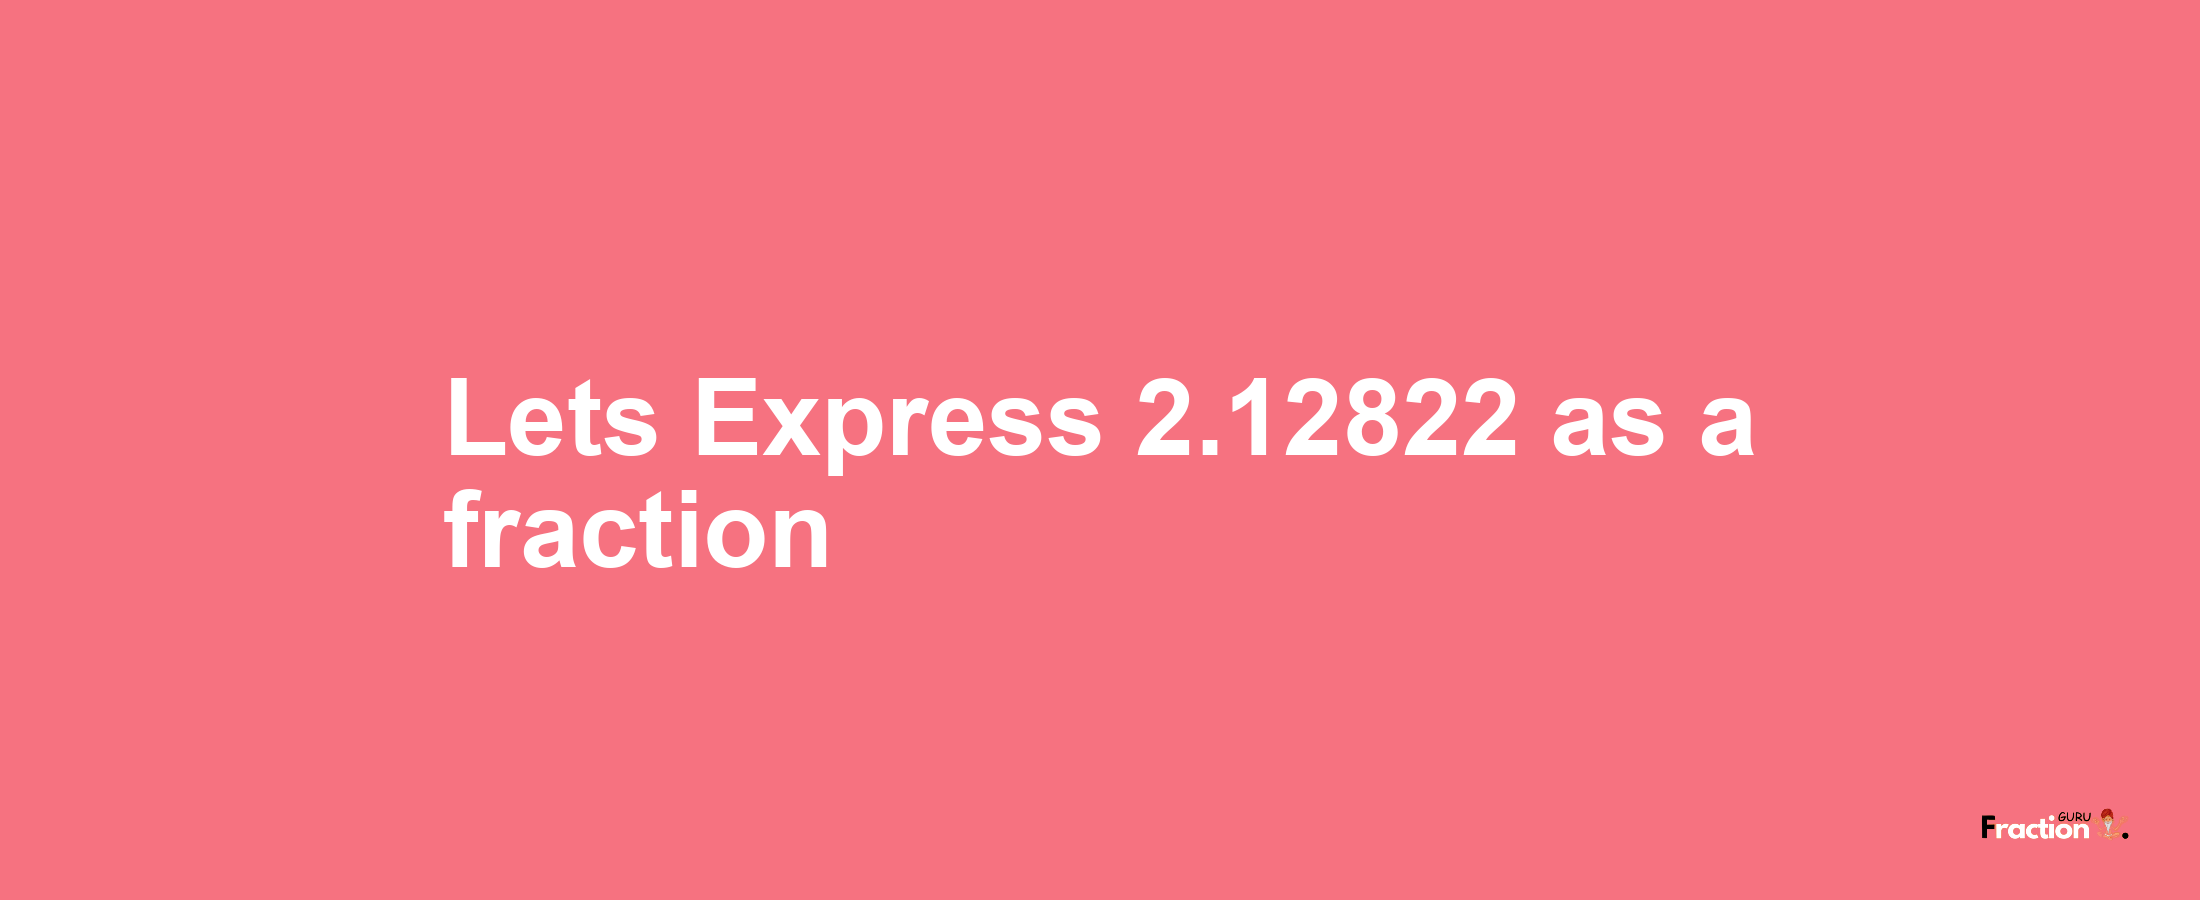 Lets Express 2.12822 as afraction